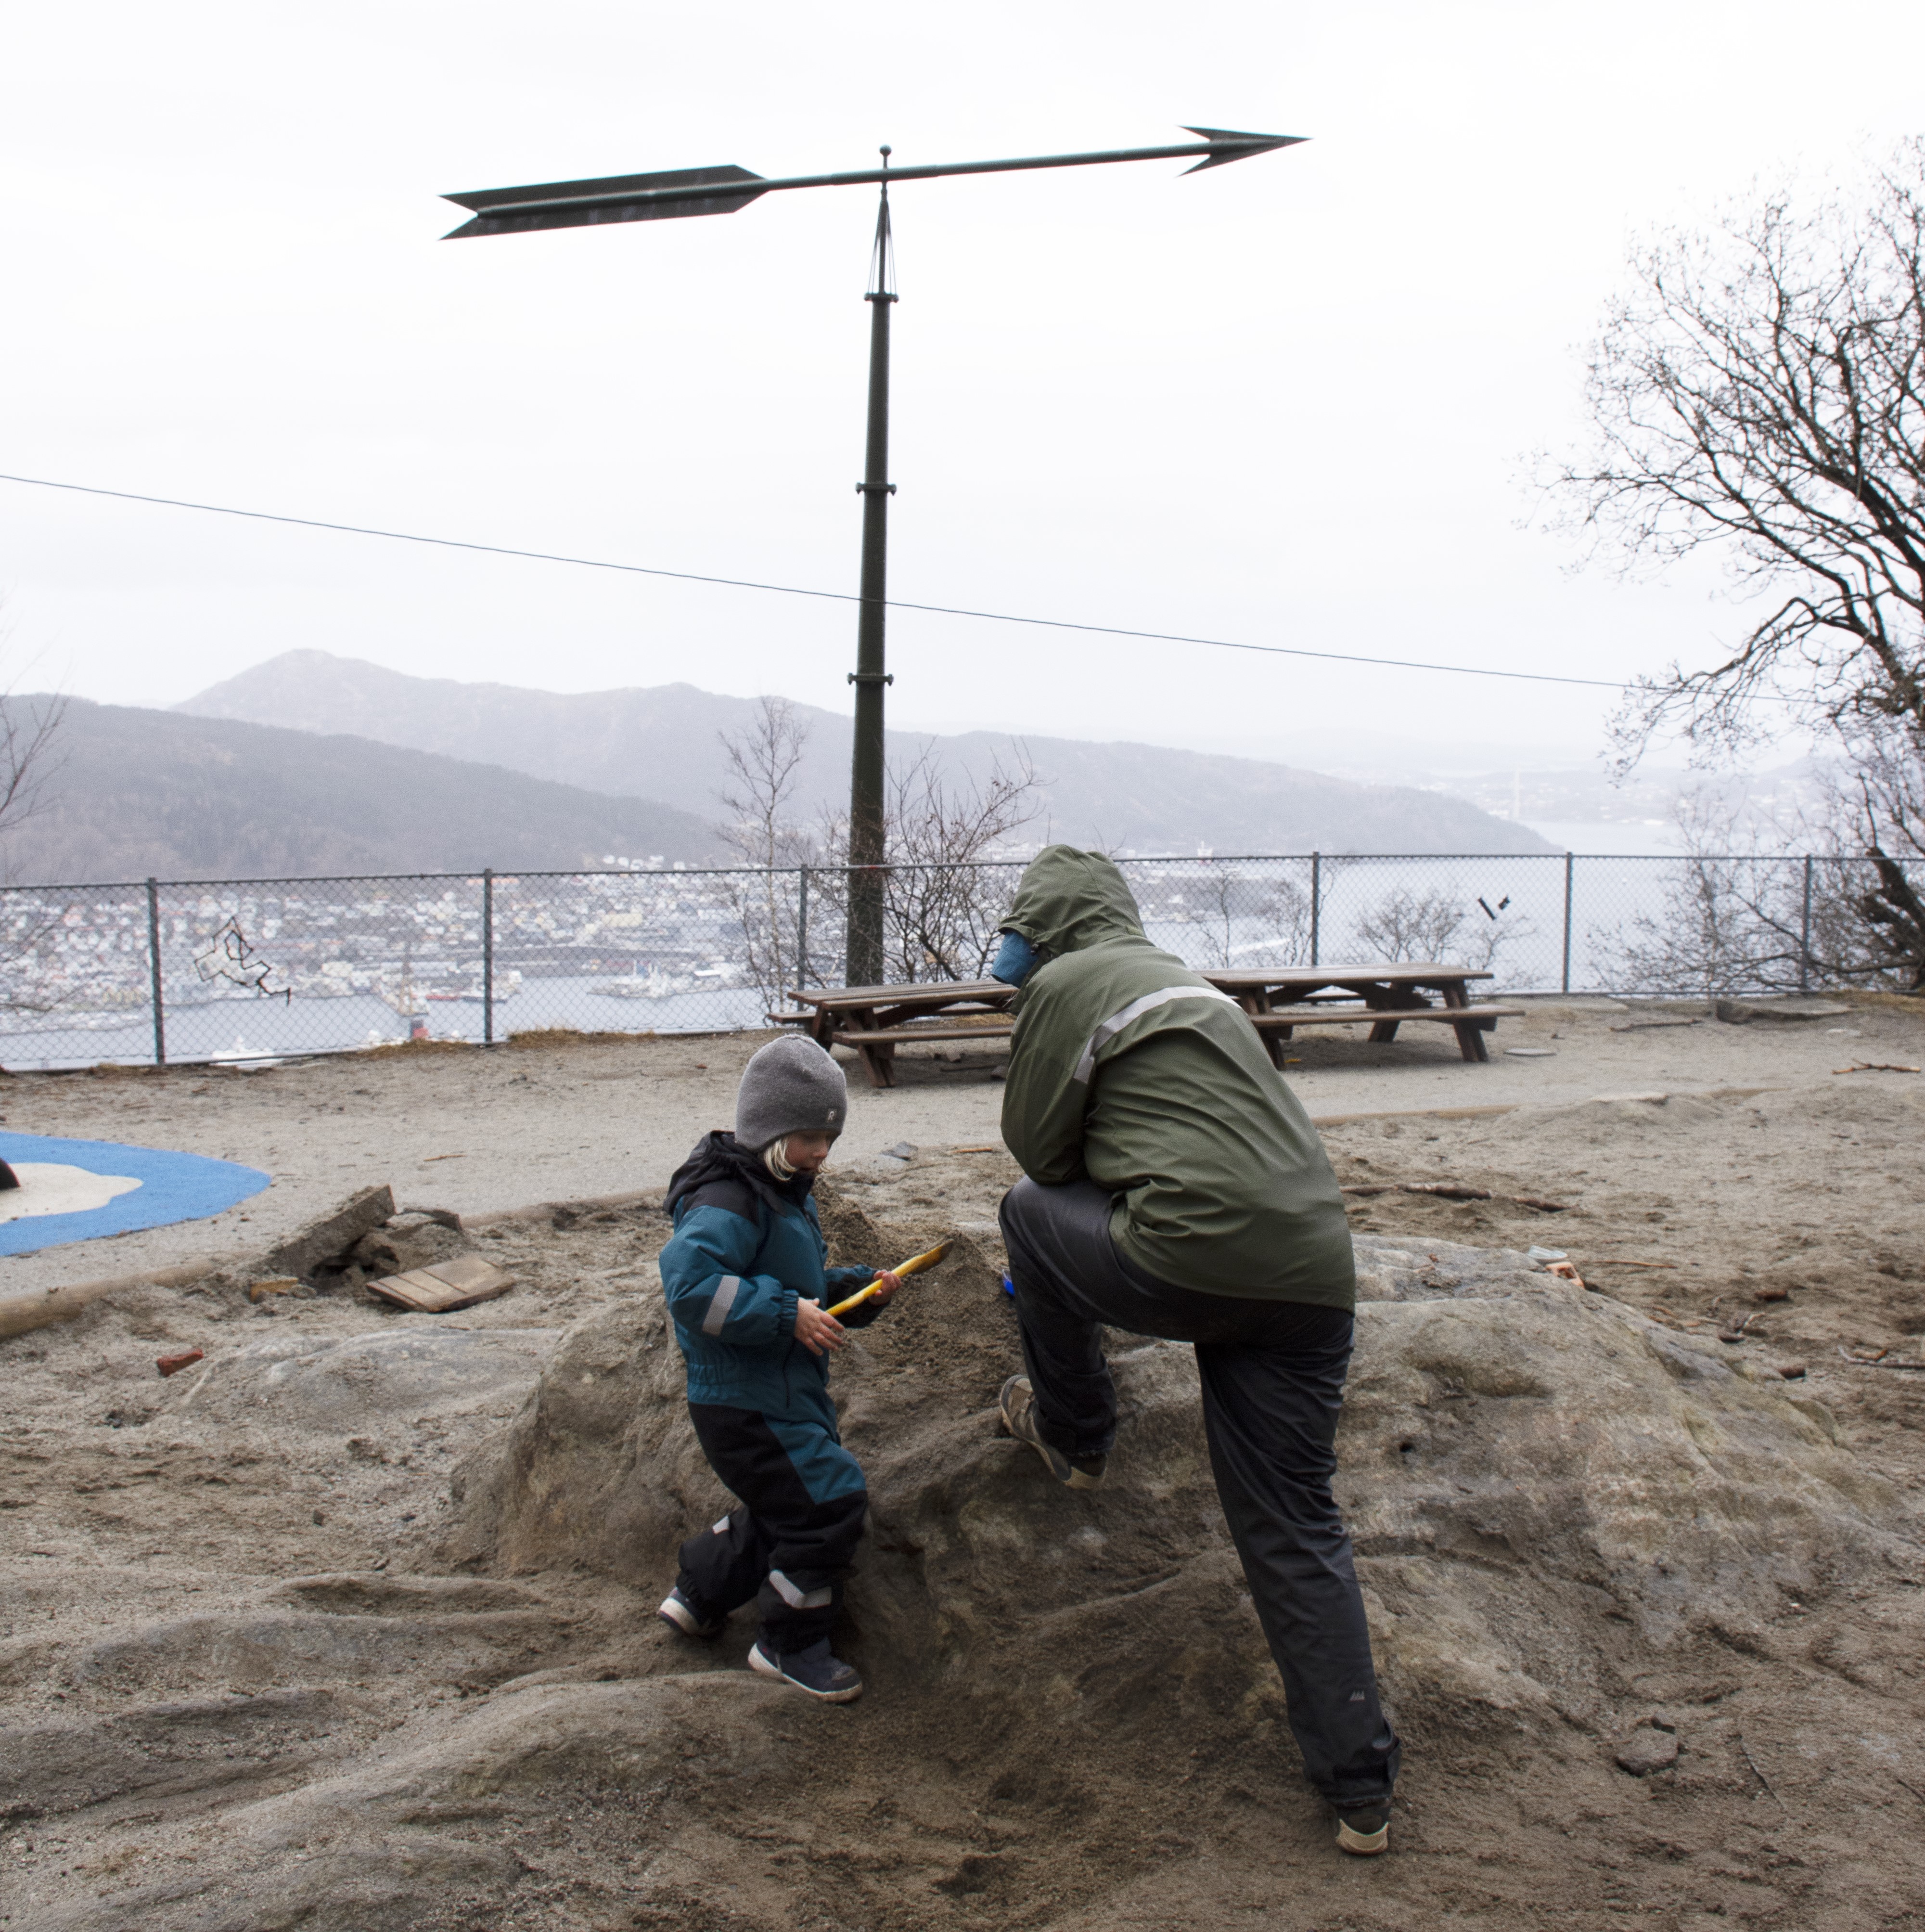 A child and an adult playing in the sand pit. Credit: Vibeke Linn Blich